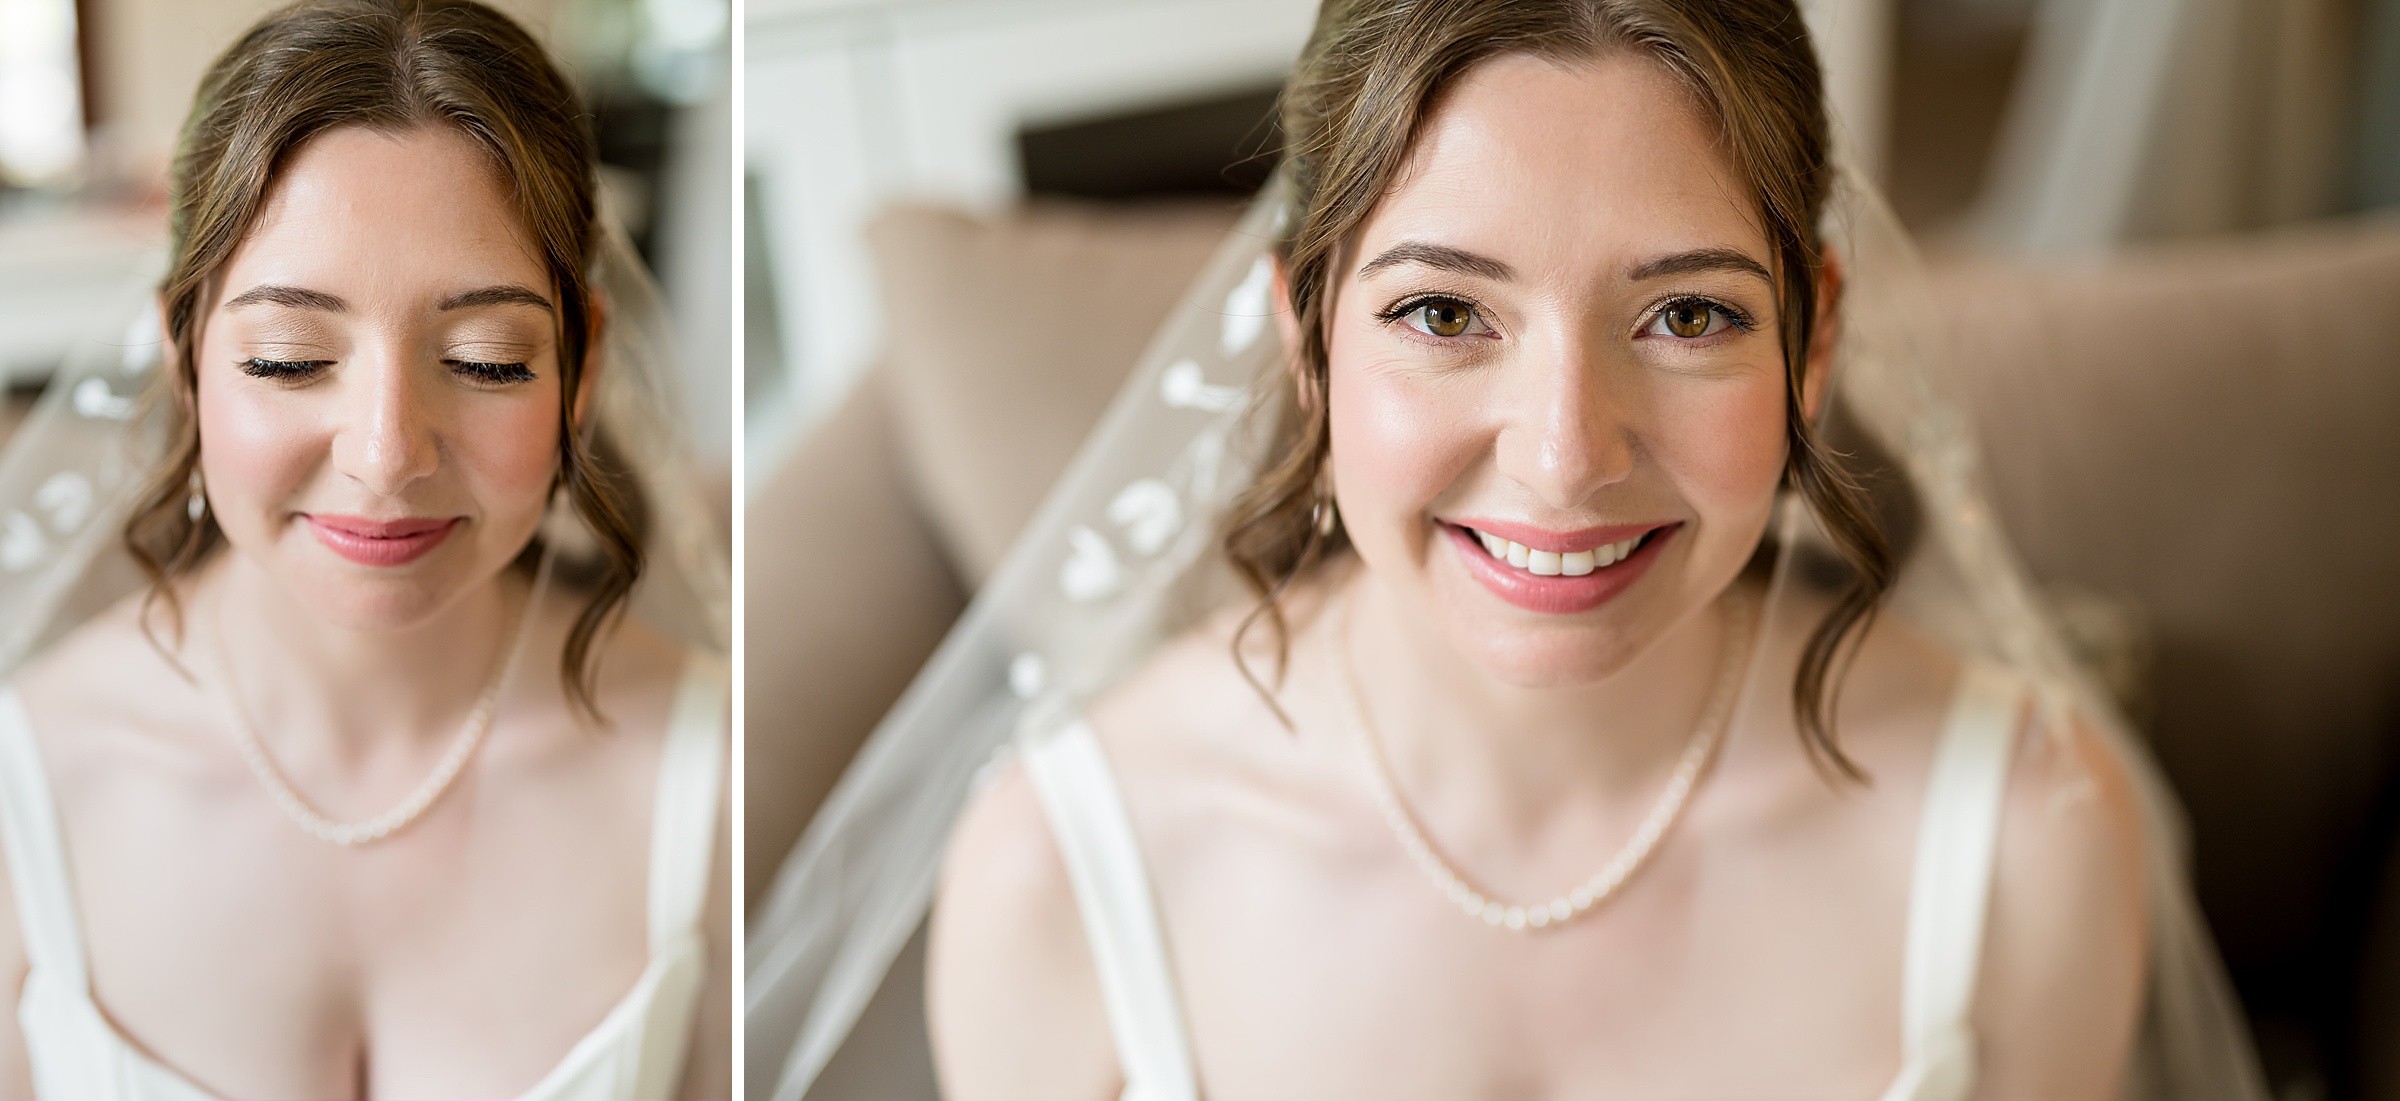 A bride with closed eyes in the left image and smiling at the camera in the right image, wearing a white dress, a veil, and a pearl necklace.